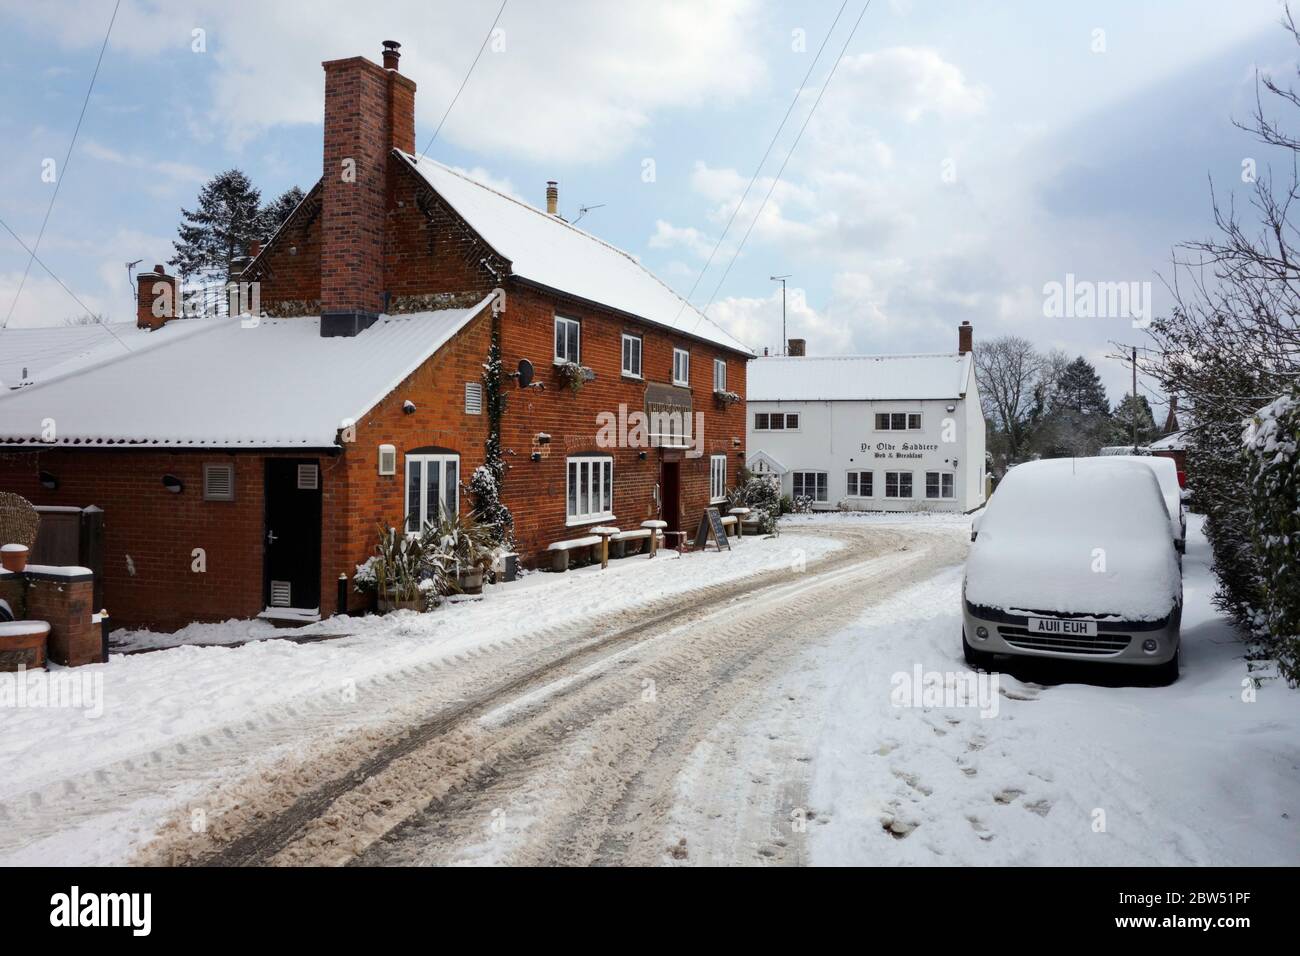 Snow covering the street in Neatishead during the winter of 2017/2018 Stock Photo